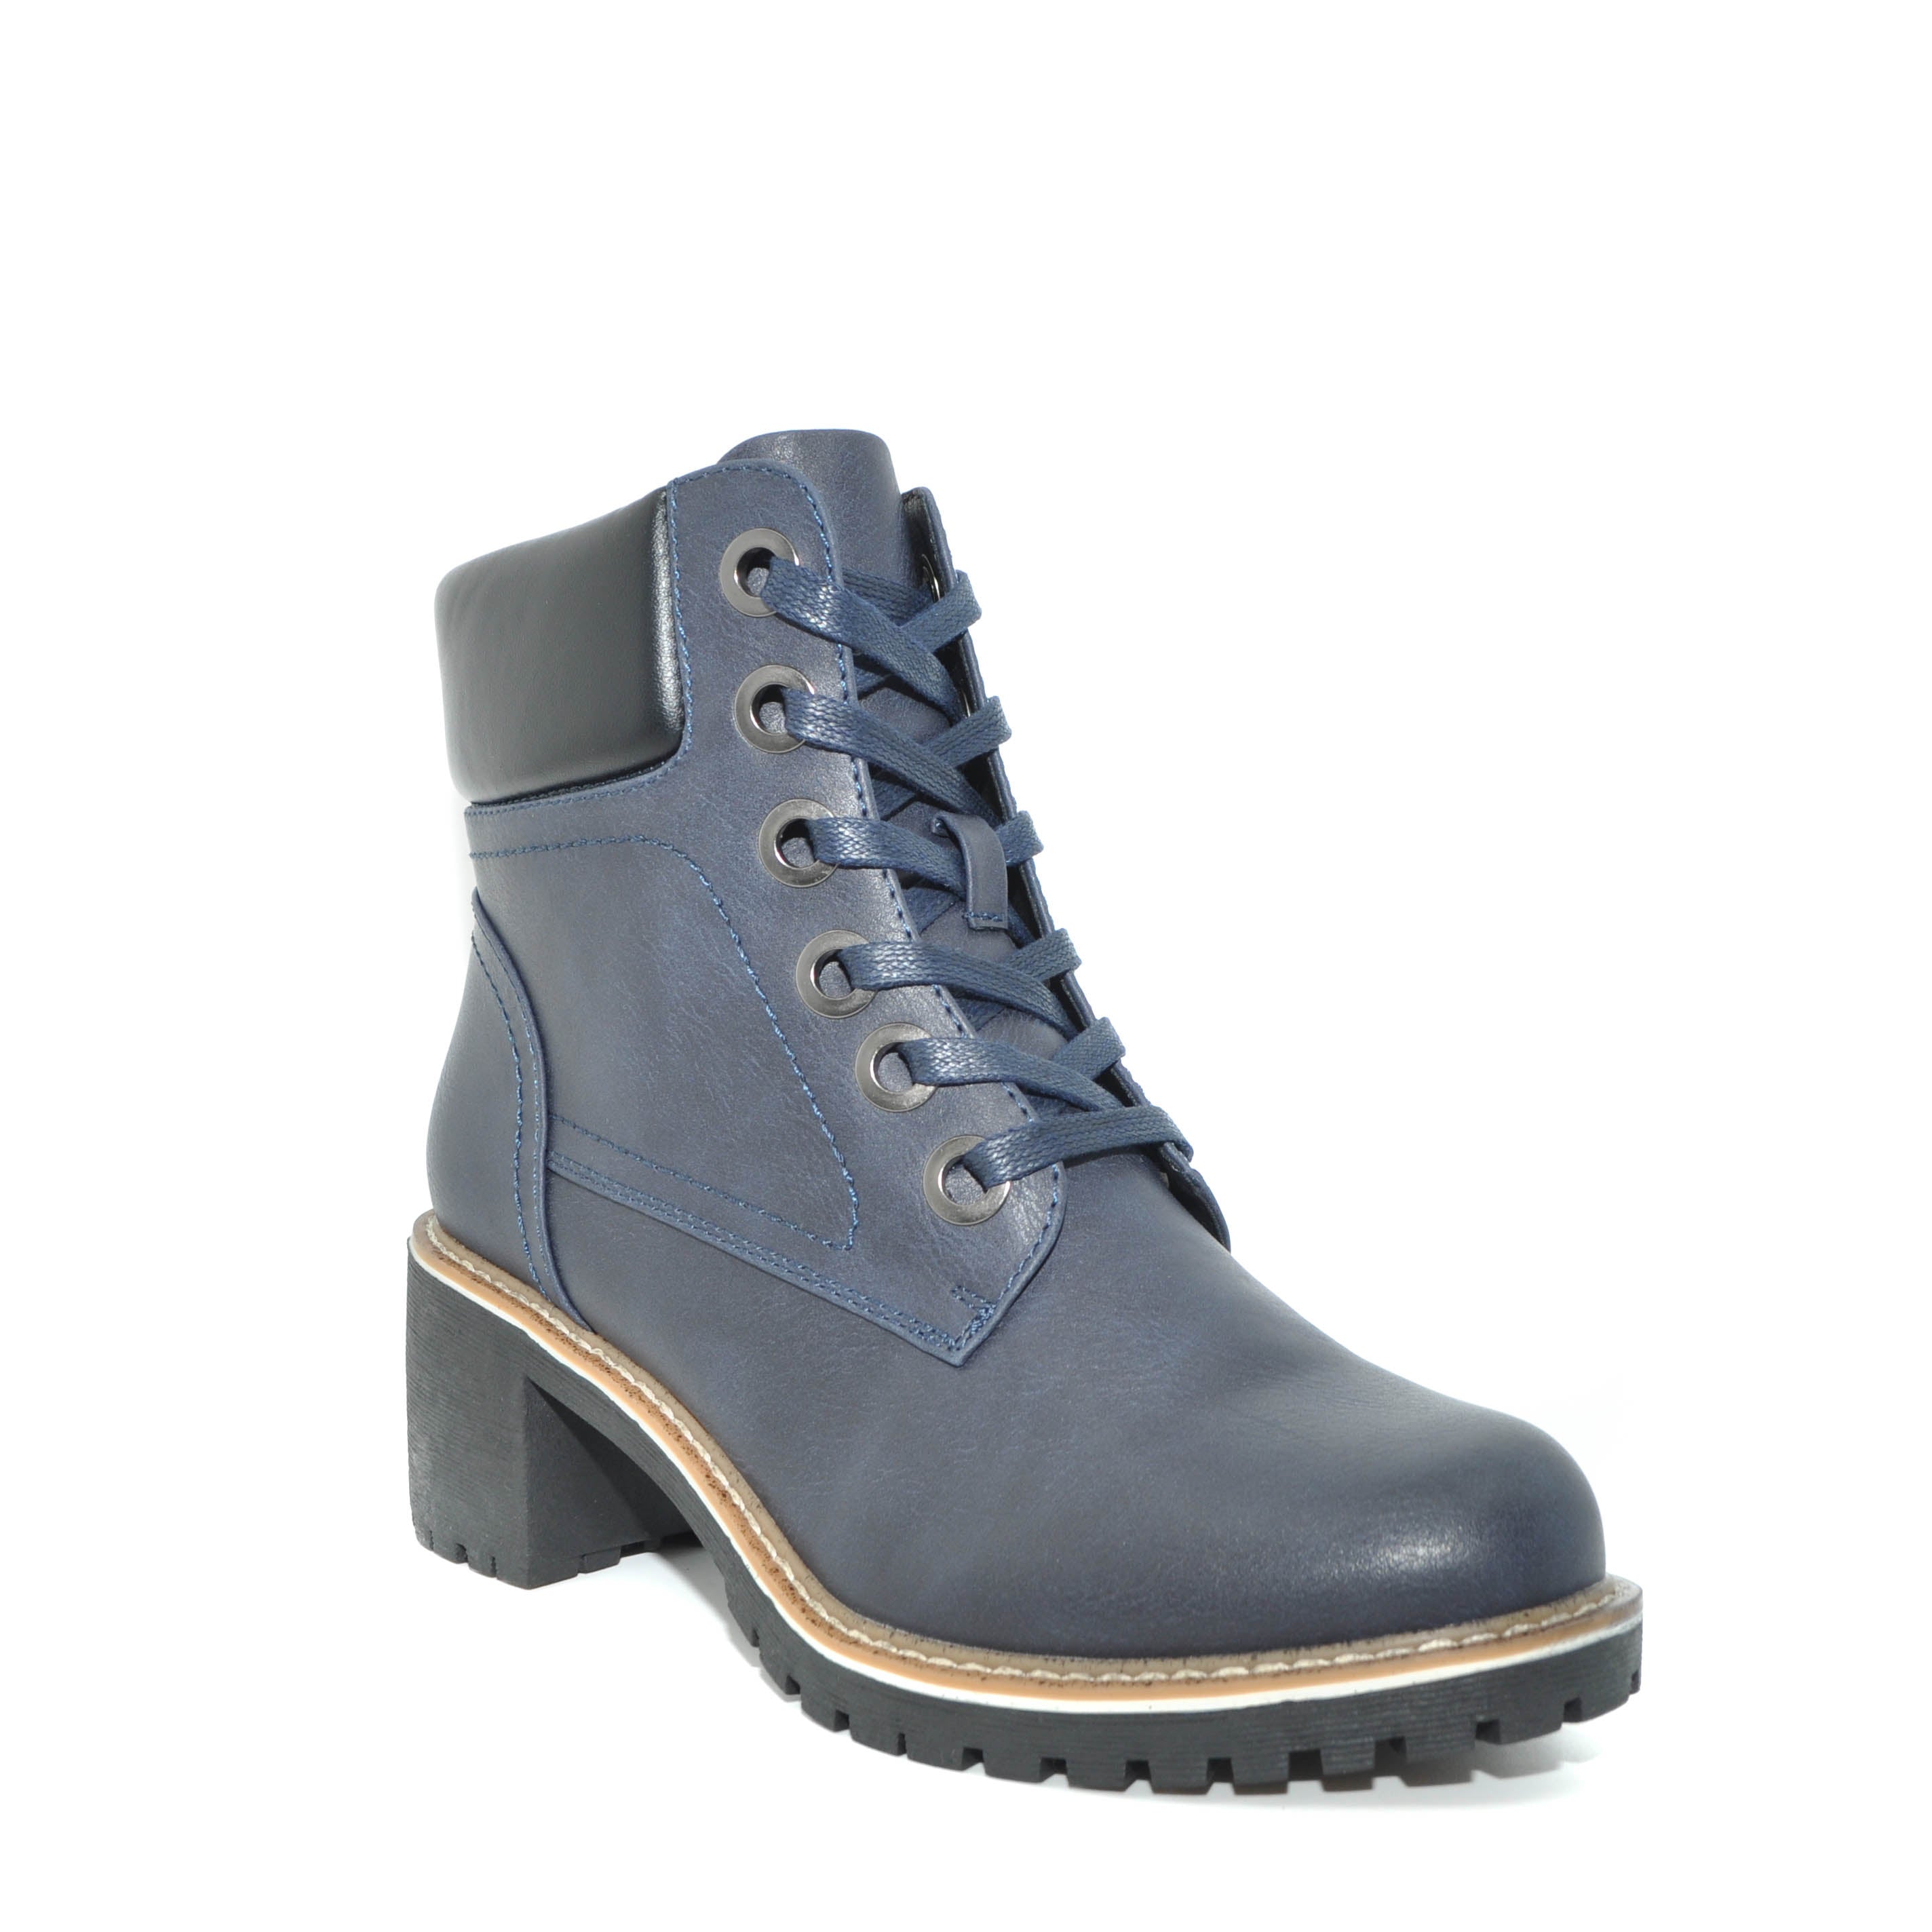 navy lace up boots women